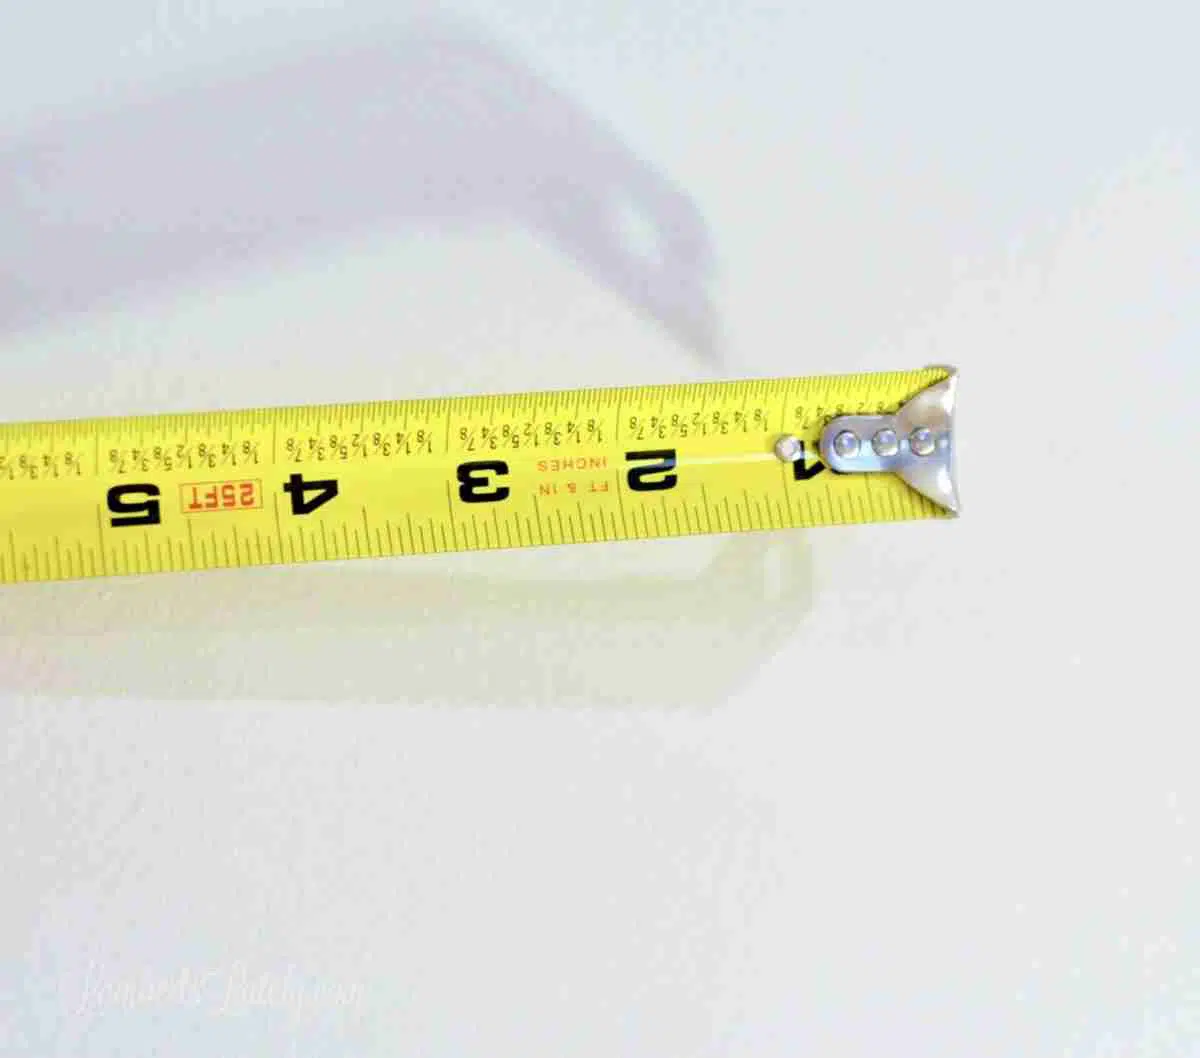 end of measuring tape.